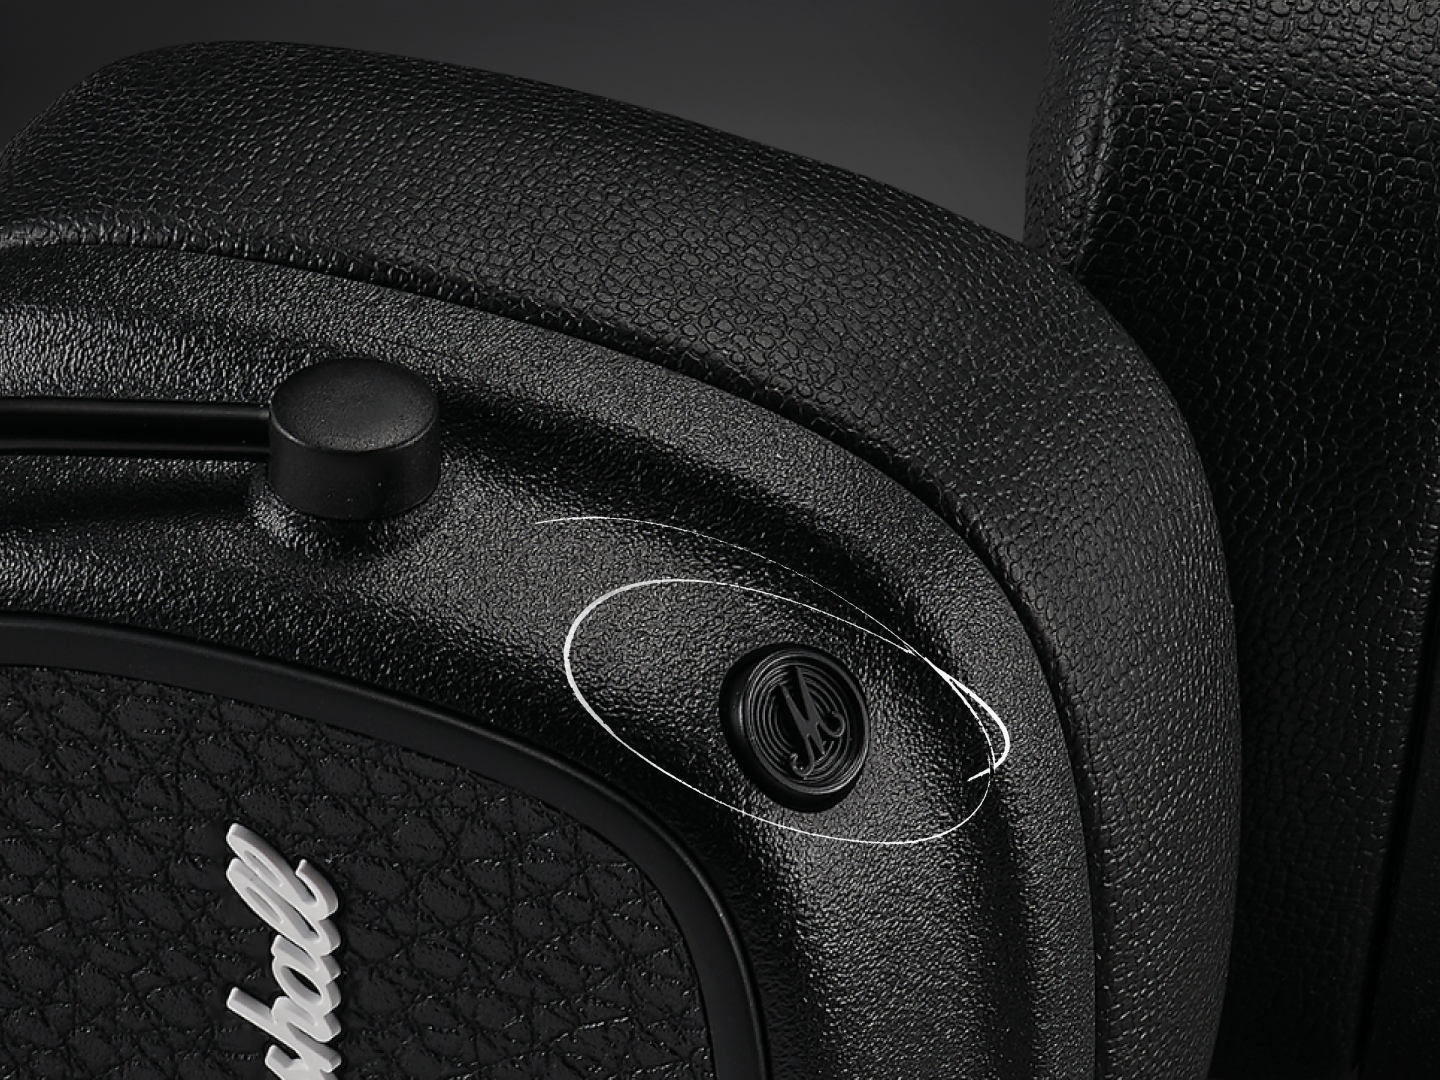 Close-up image showing M-button on Marshall Major V Black on-ear headphones.